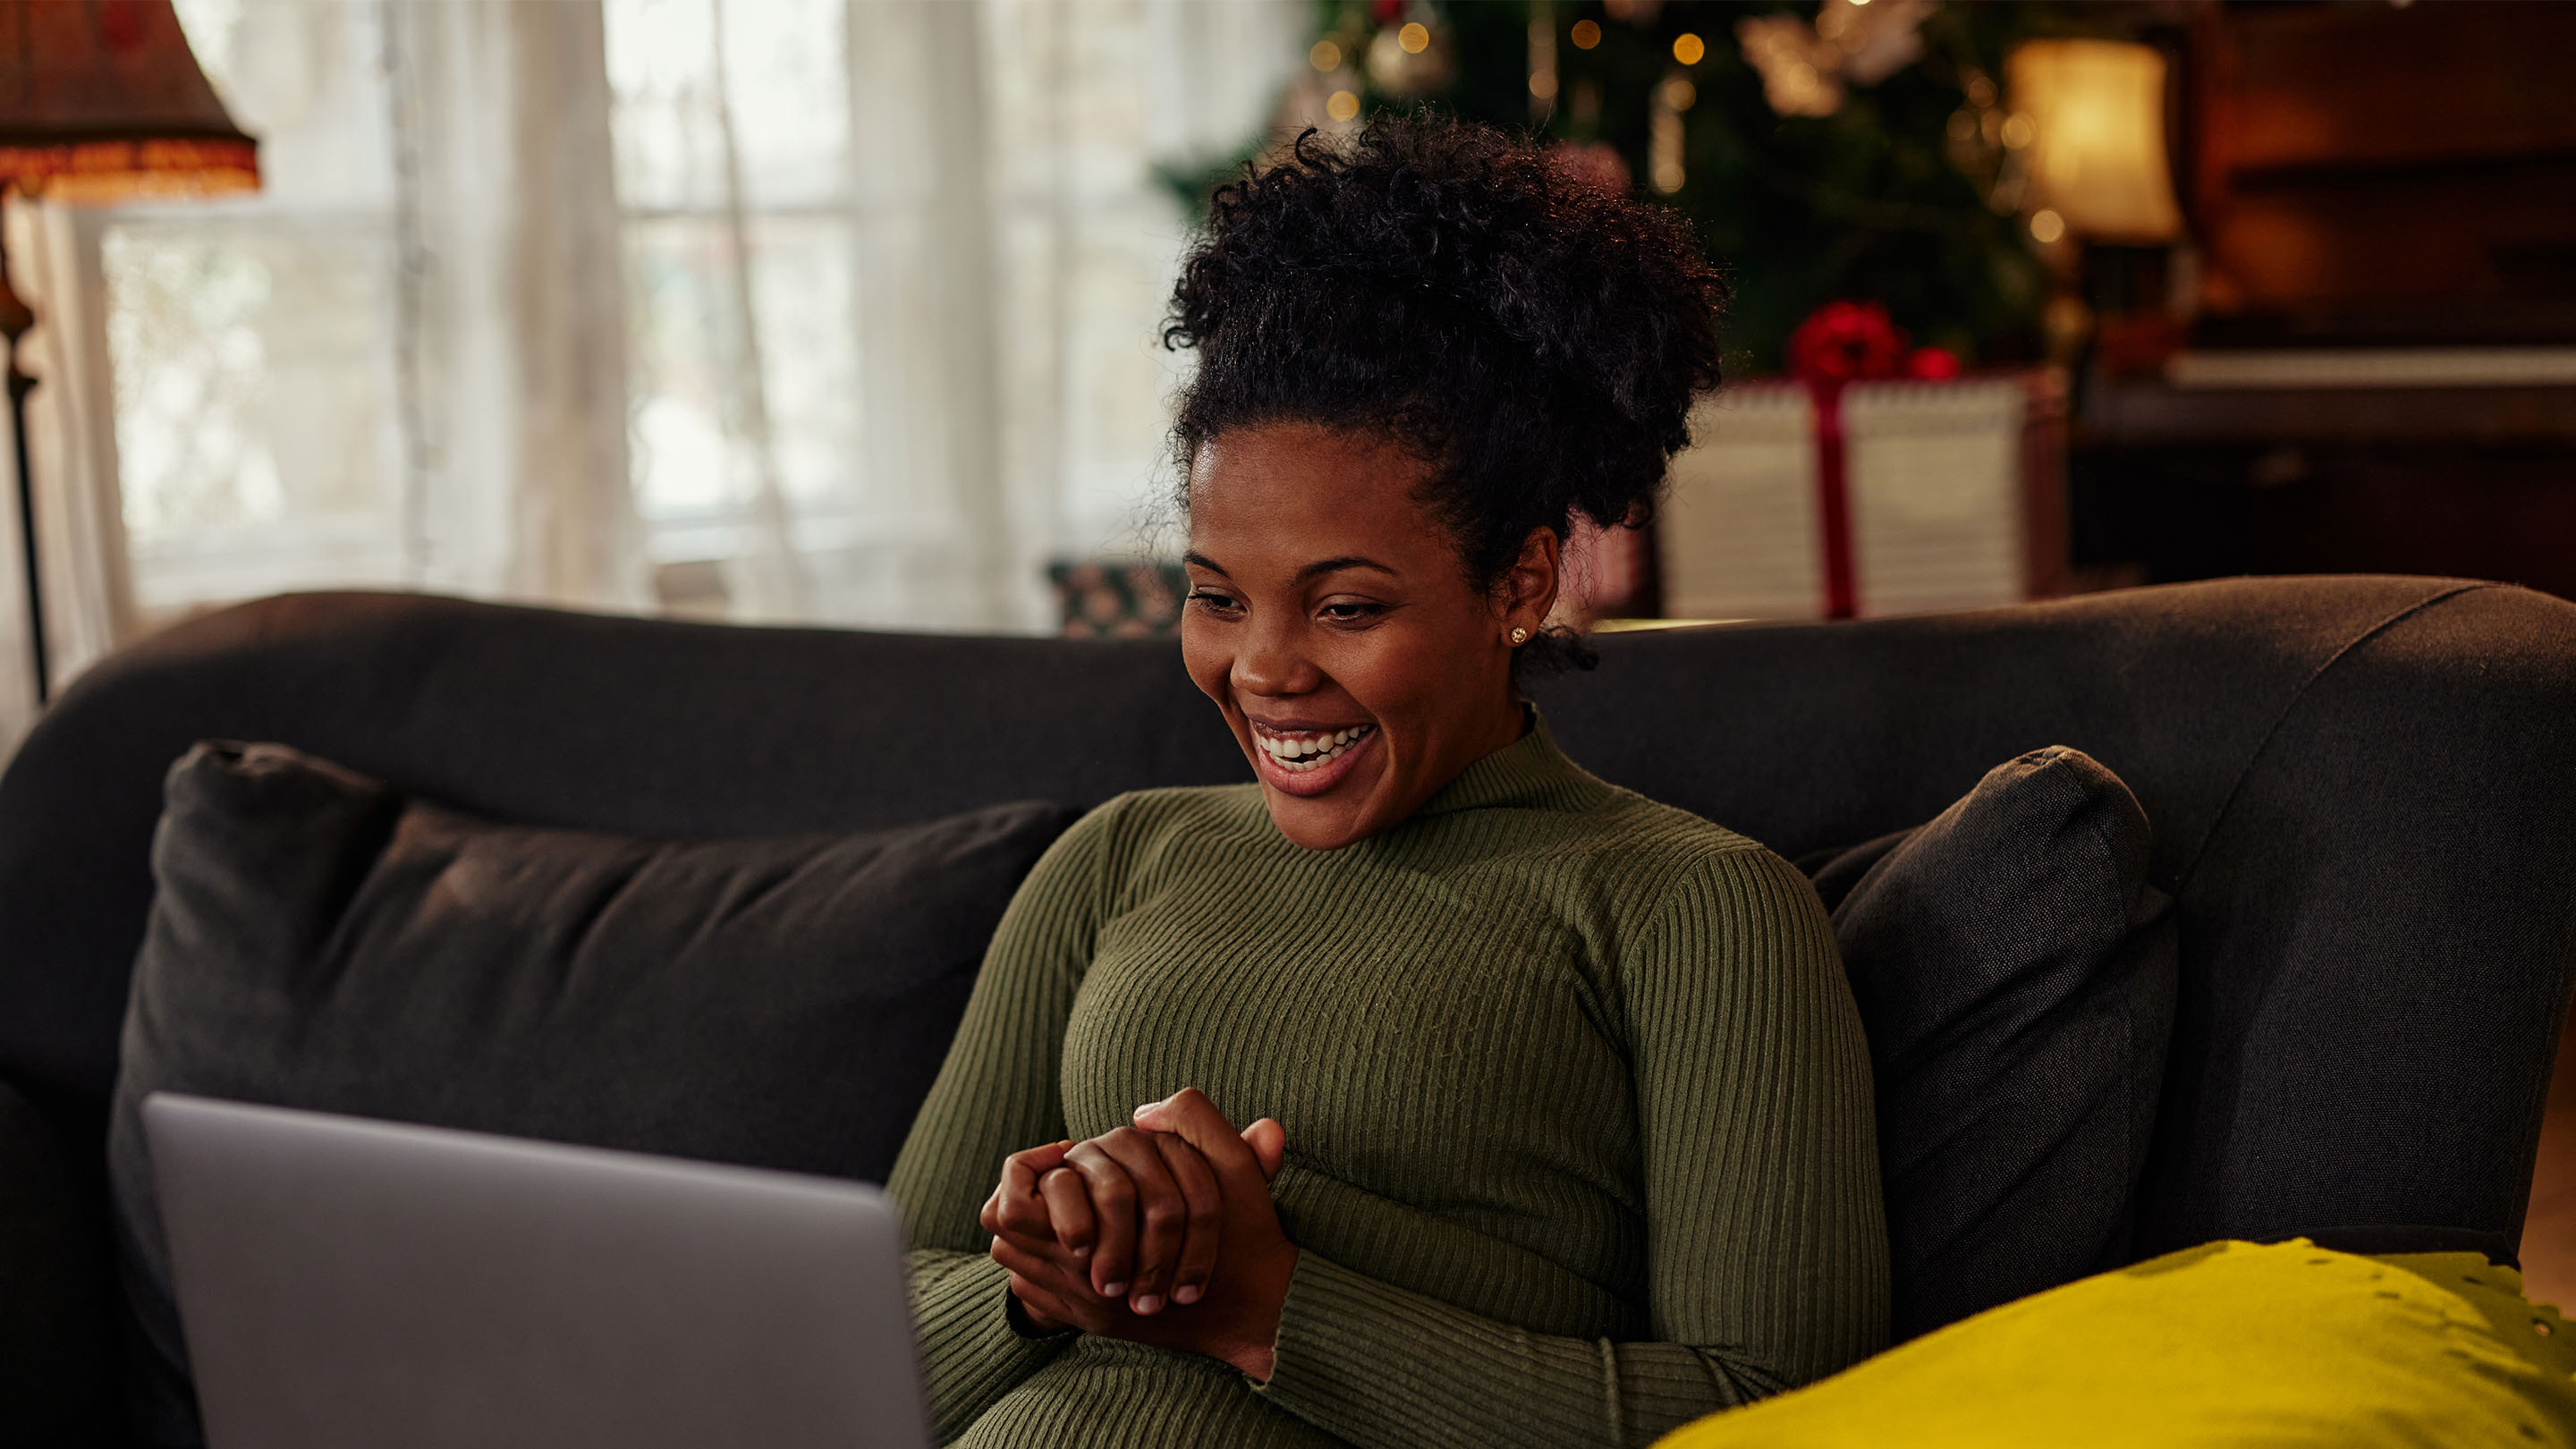 Woman enjoying Christmas time with the help of technology